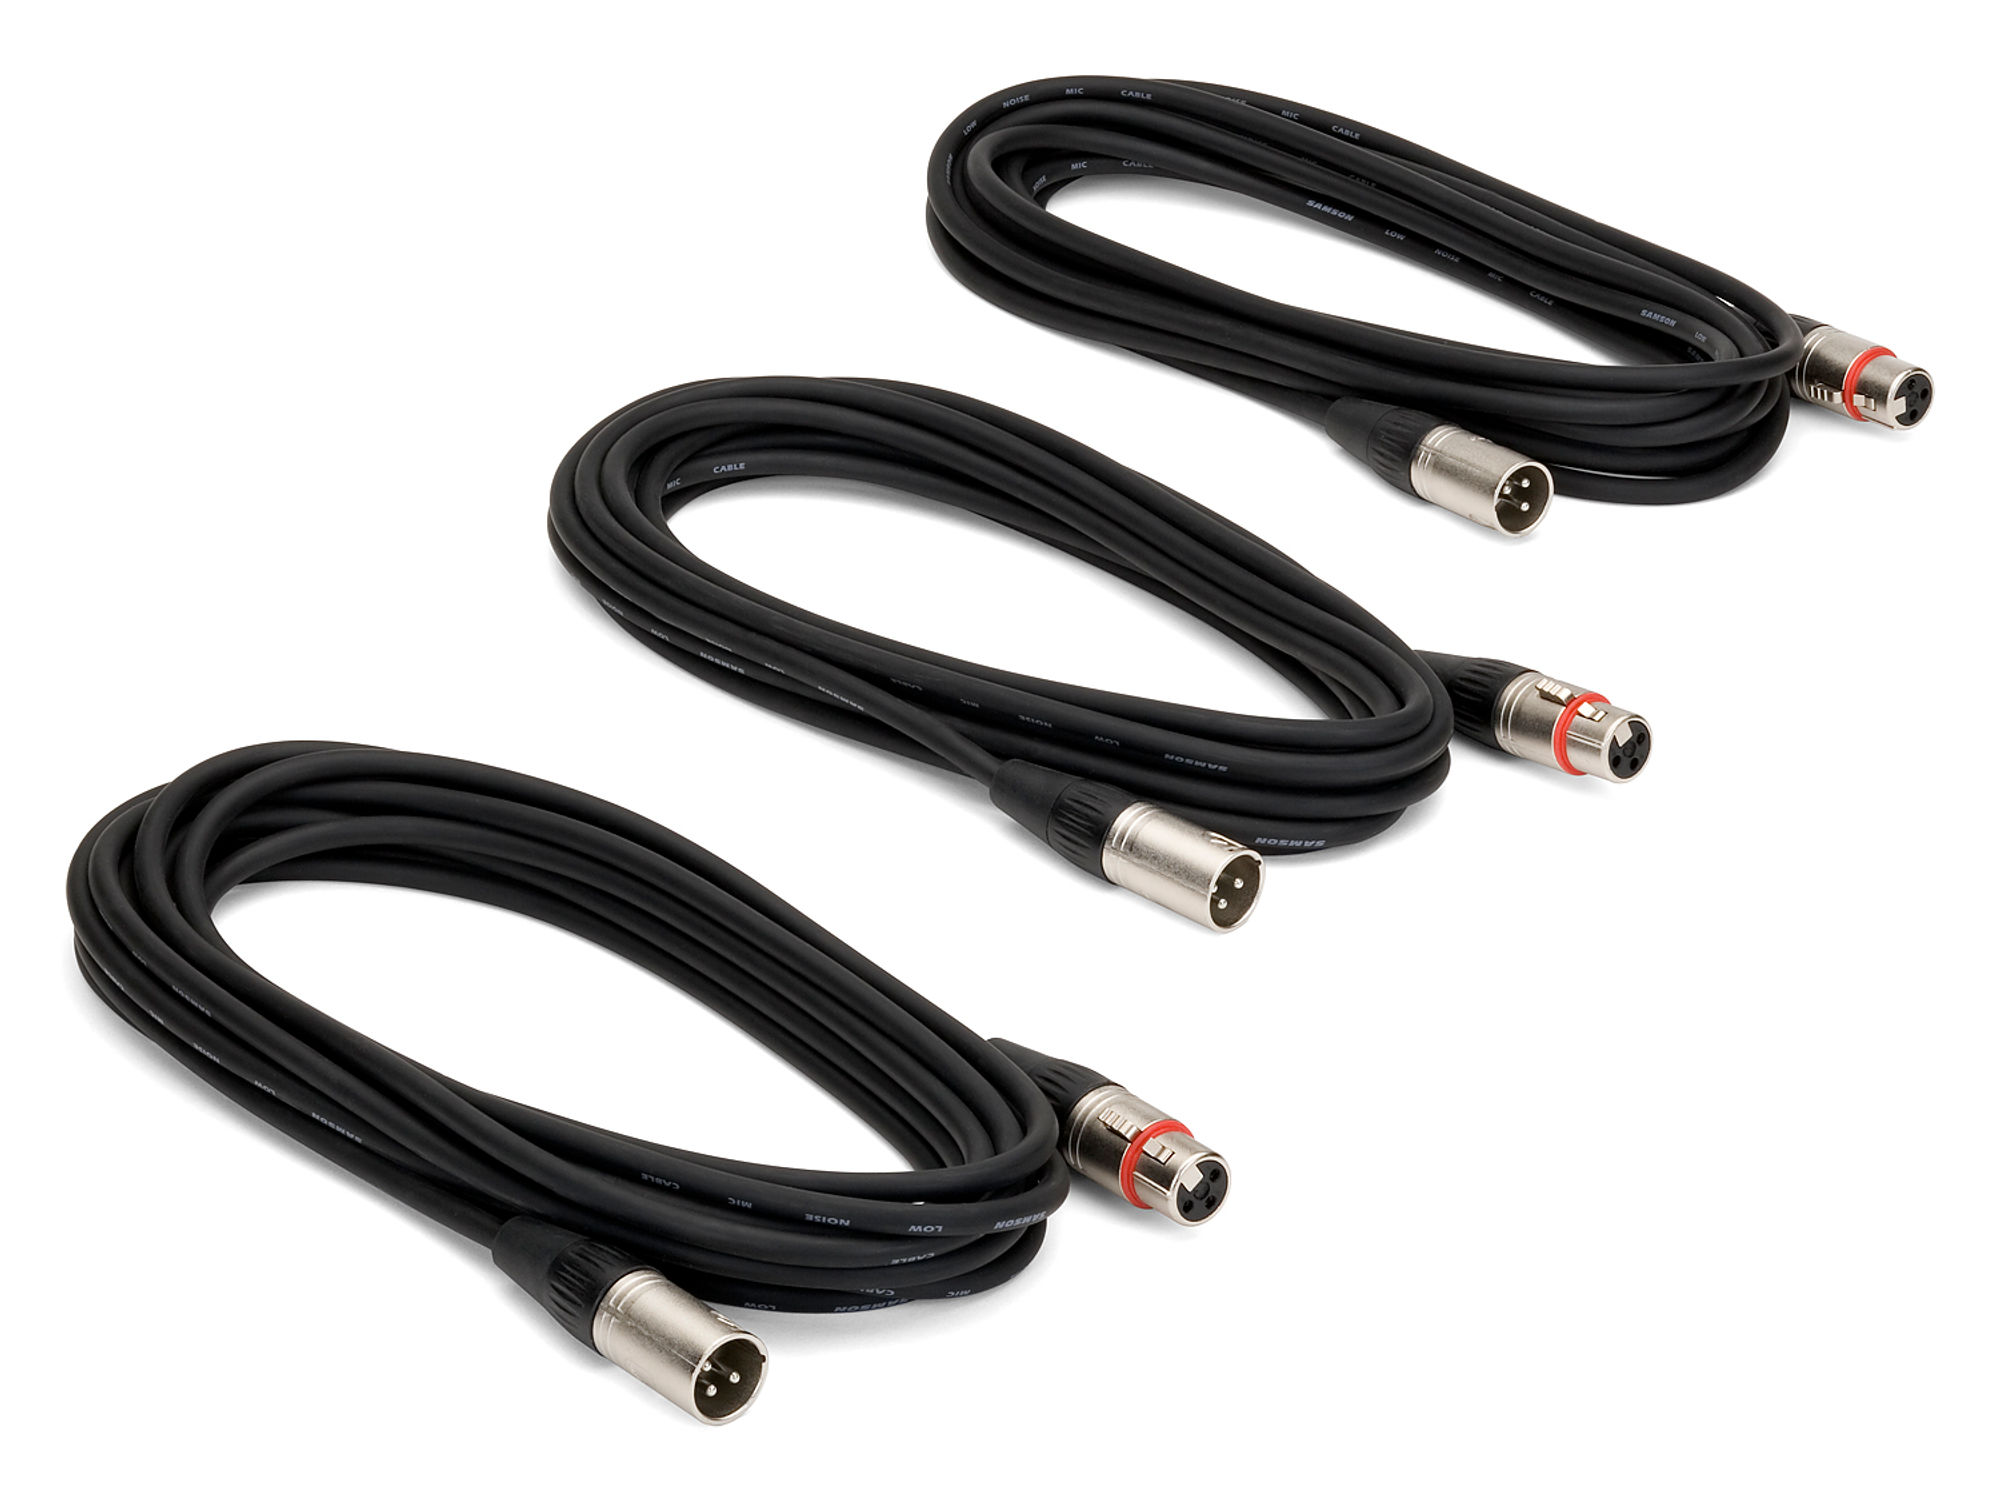 MC18 Mic Cables, three next to each other